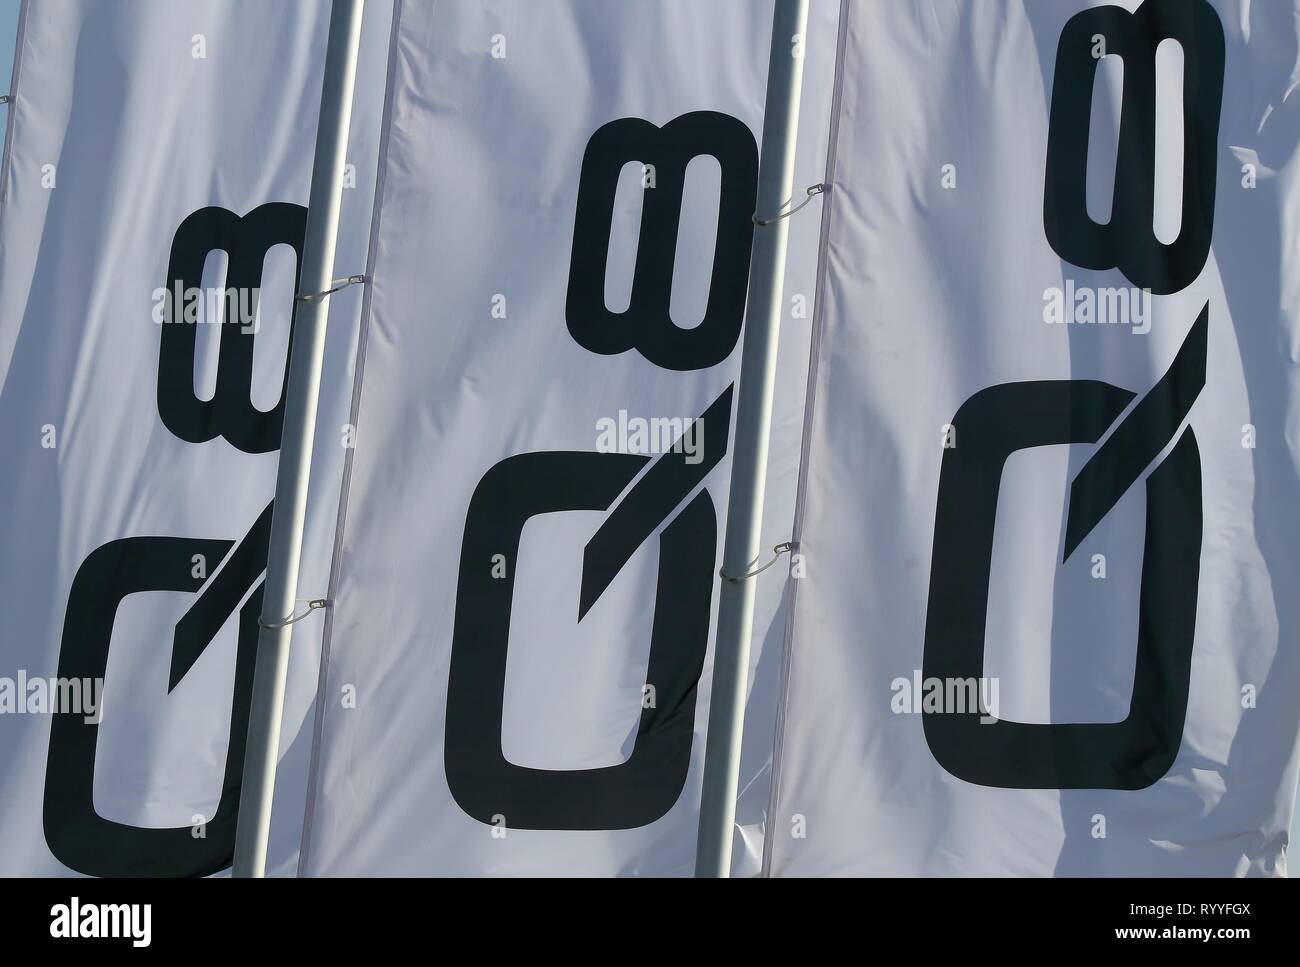 Bucharest, Romania - October 17, 2018: The Audi Q8 car's logo is seen on some flags in a showroom in Bucharest, Romania. This image is for editorial u Stock Photo